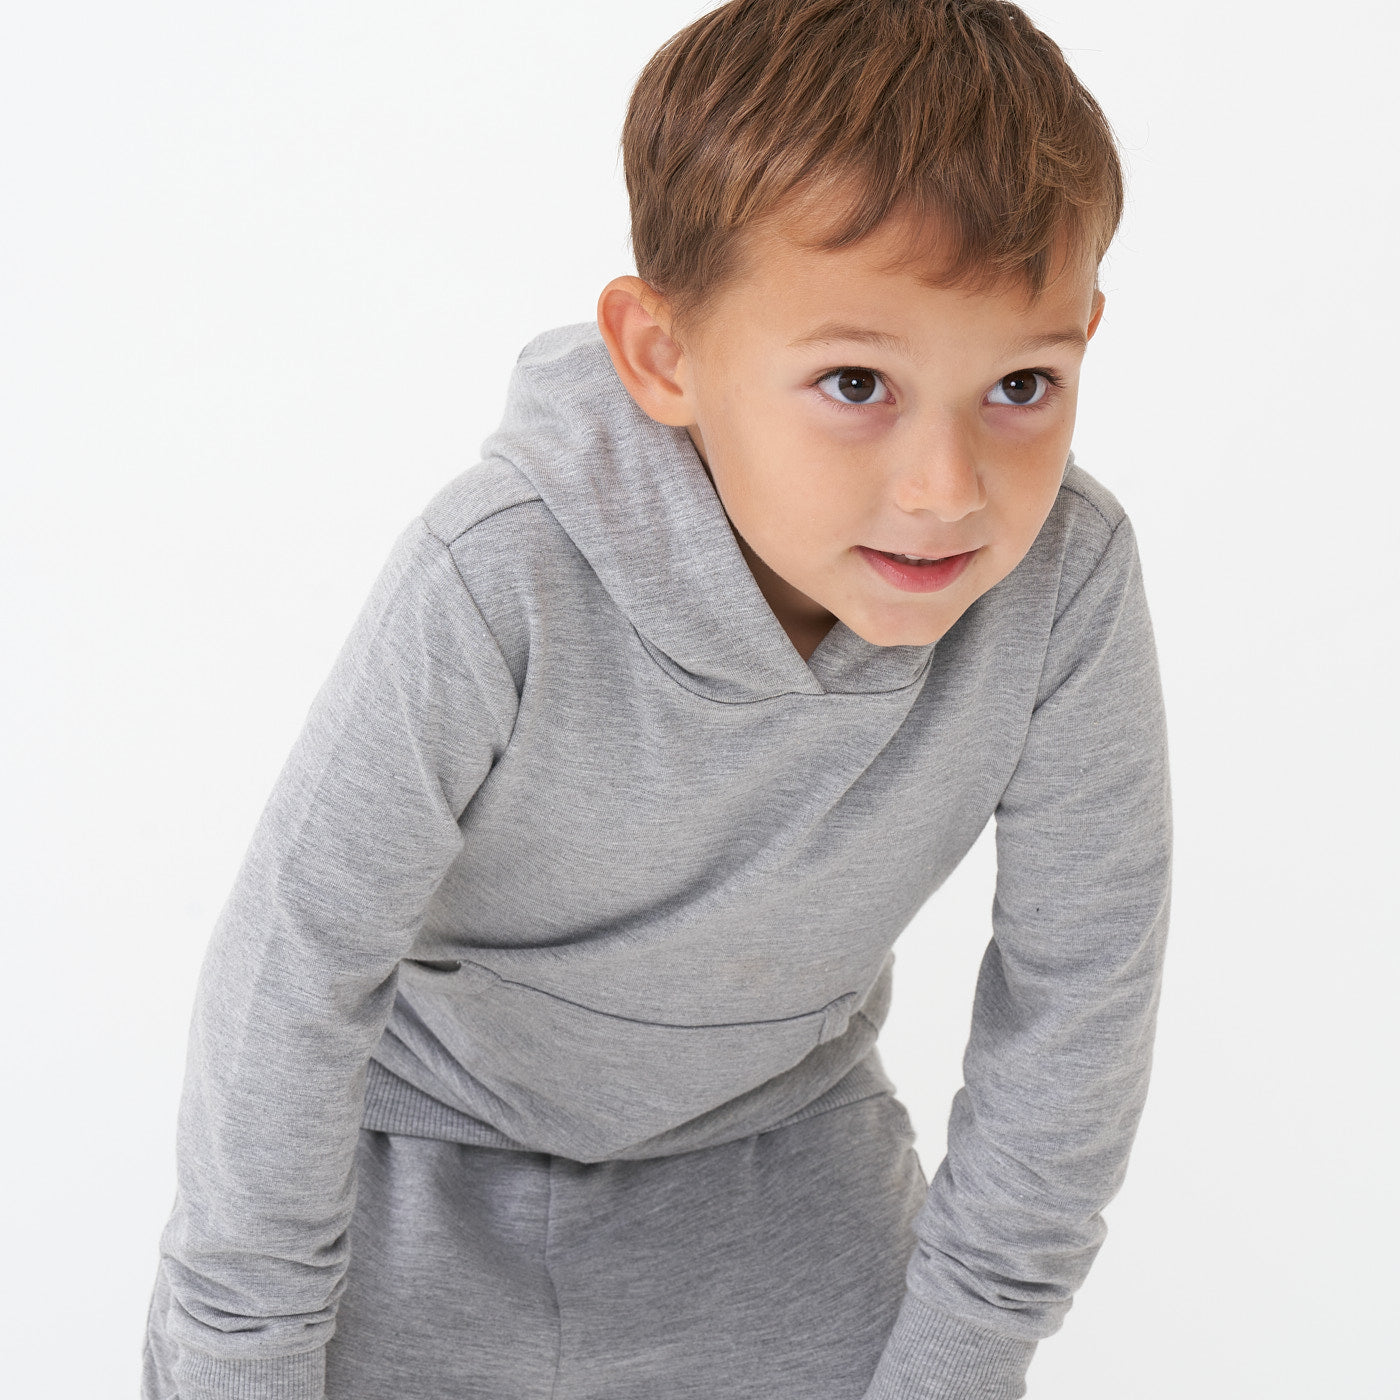 Child wearing a Heather Gray pullover hoodie